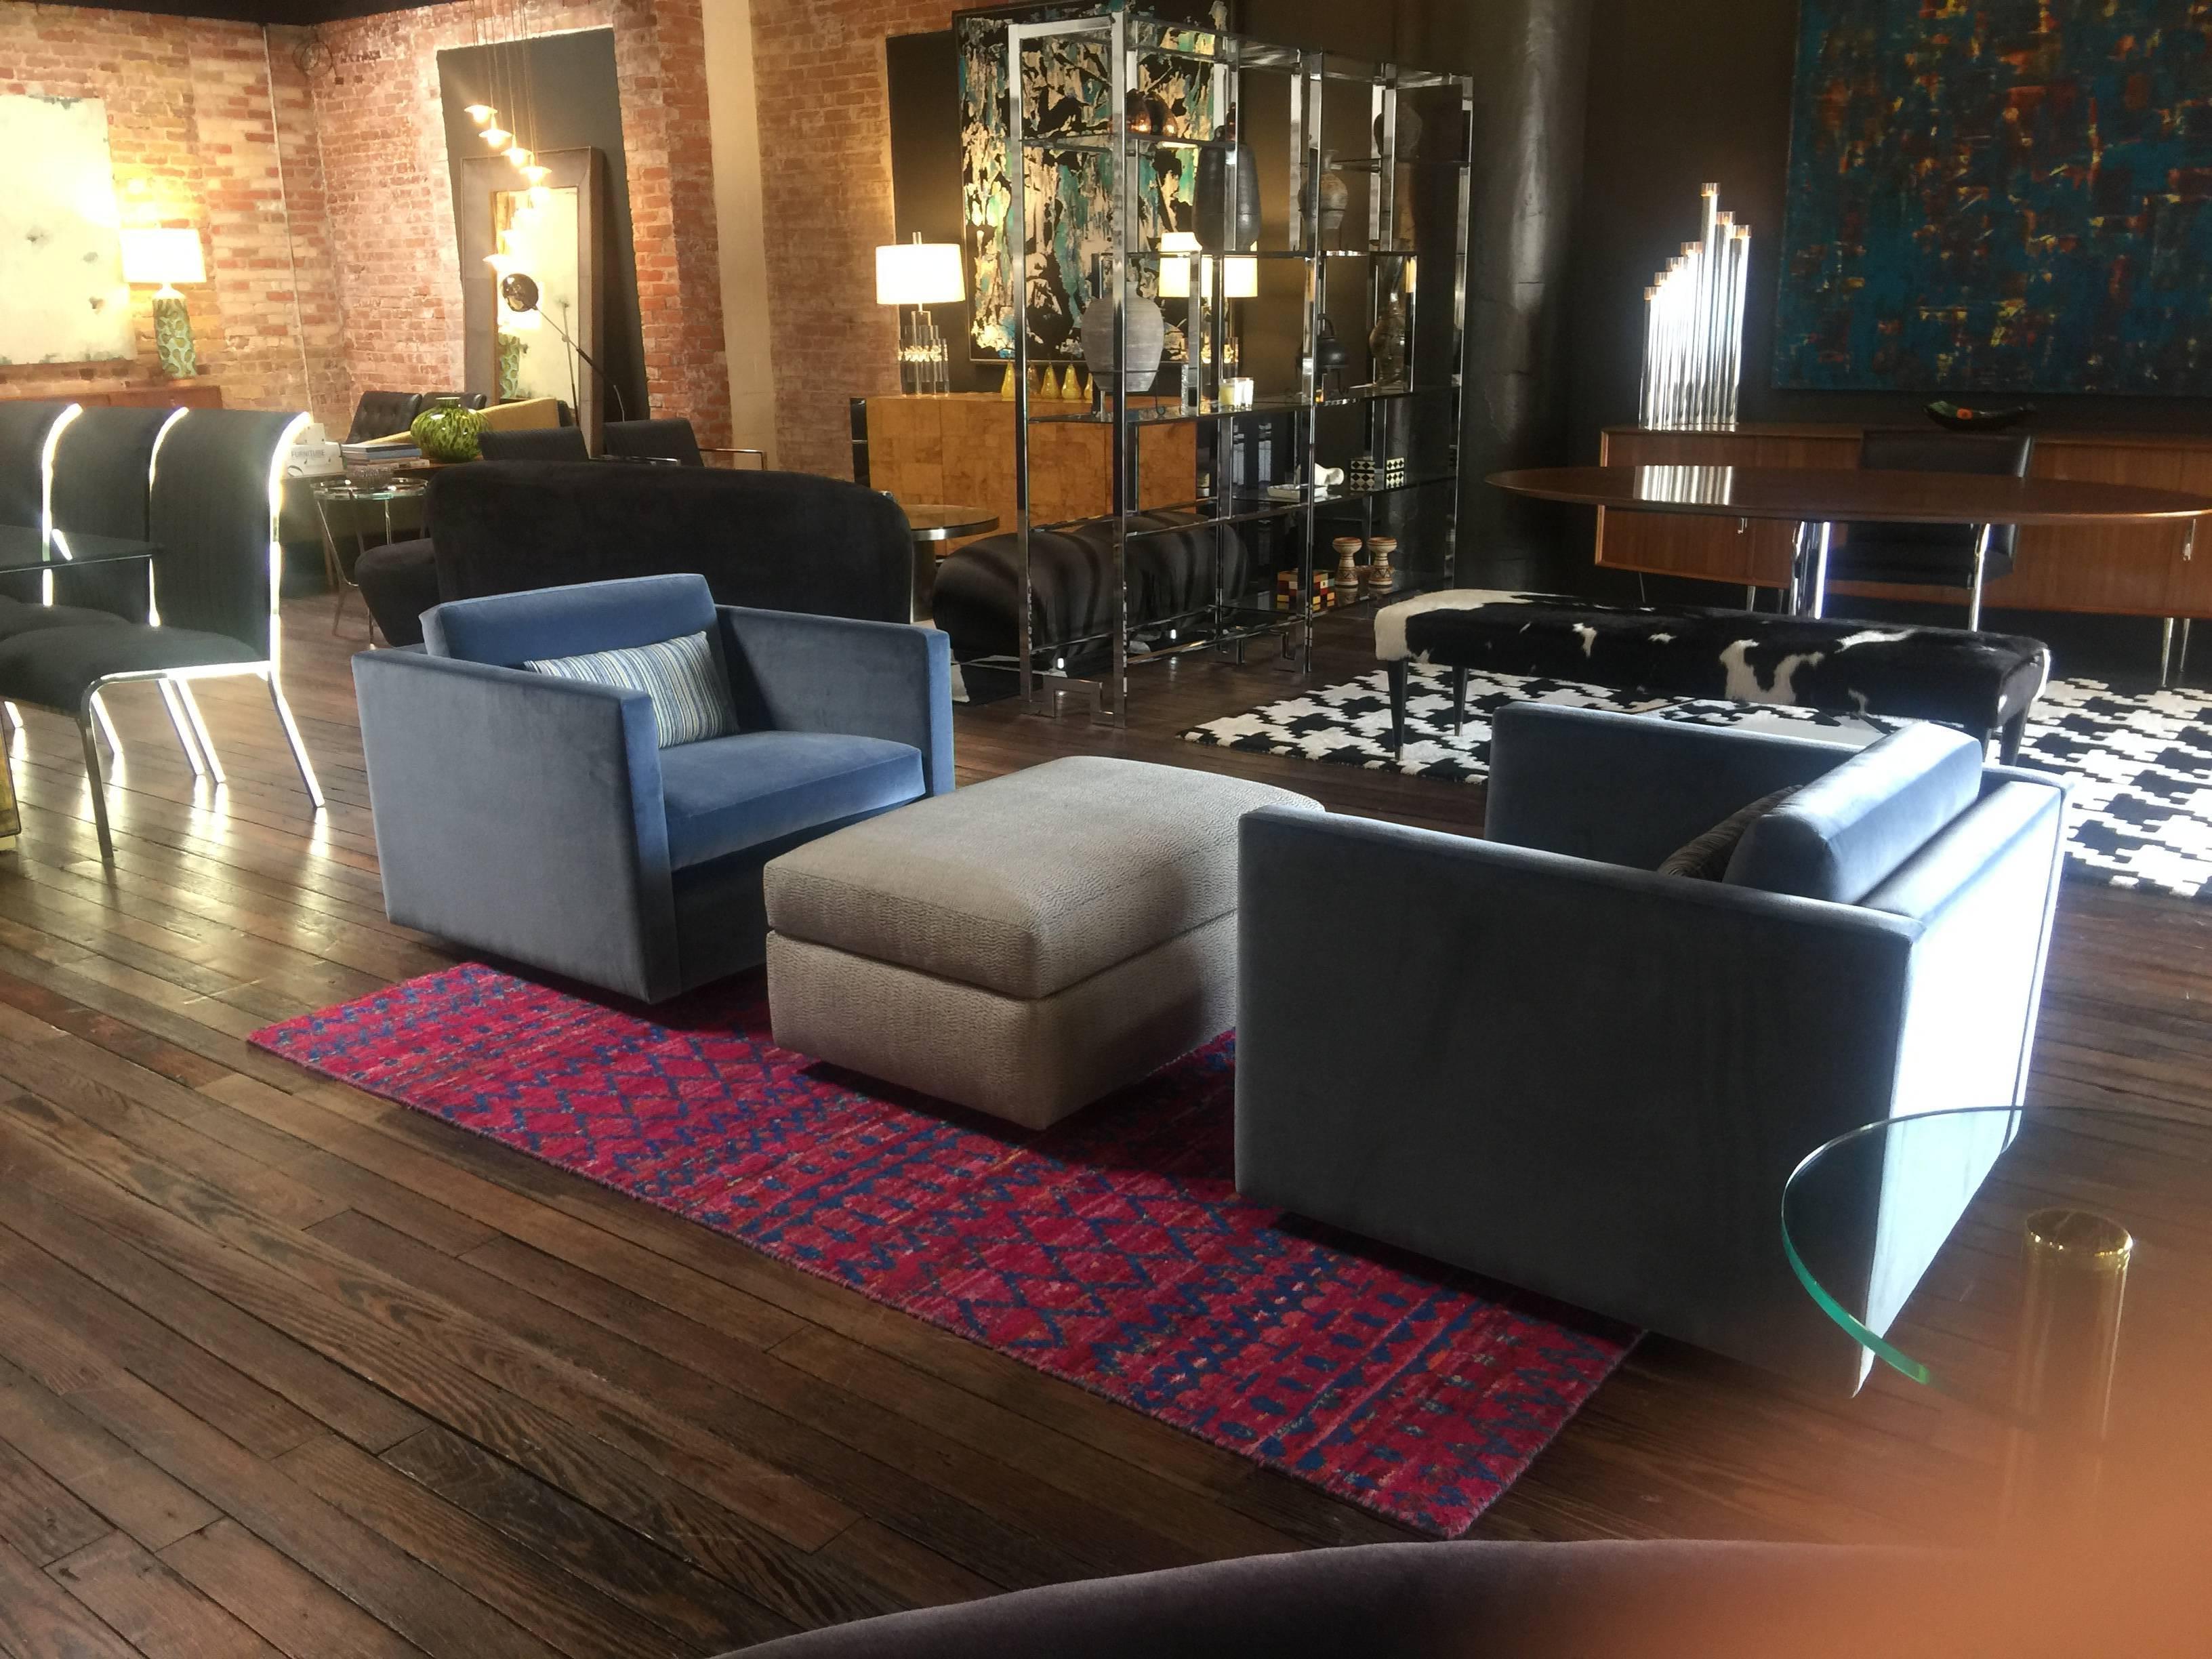 Knoll Lounge Chairs by Charles Pfister newly upholstered in blue velvet. A ottoman is upholstered in Holly Hunt fabric.  Ottoman is 33